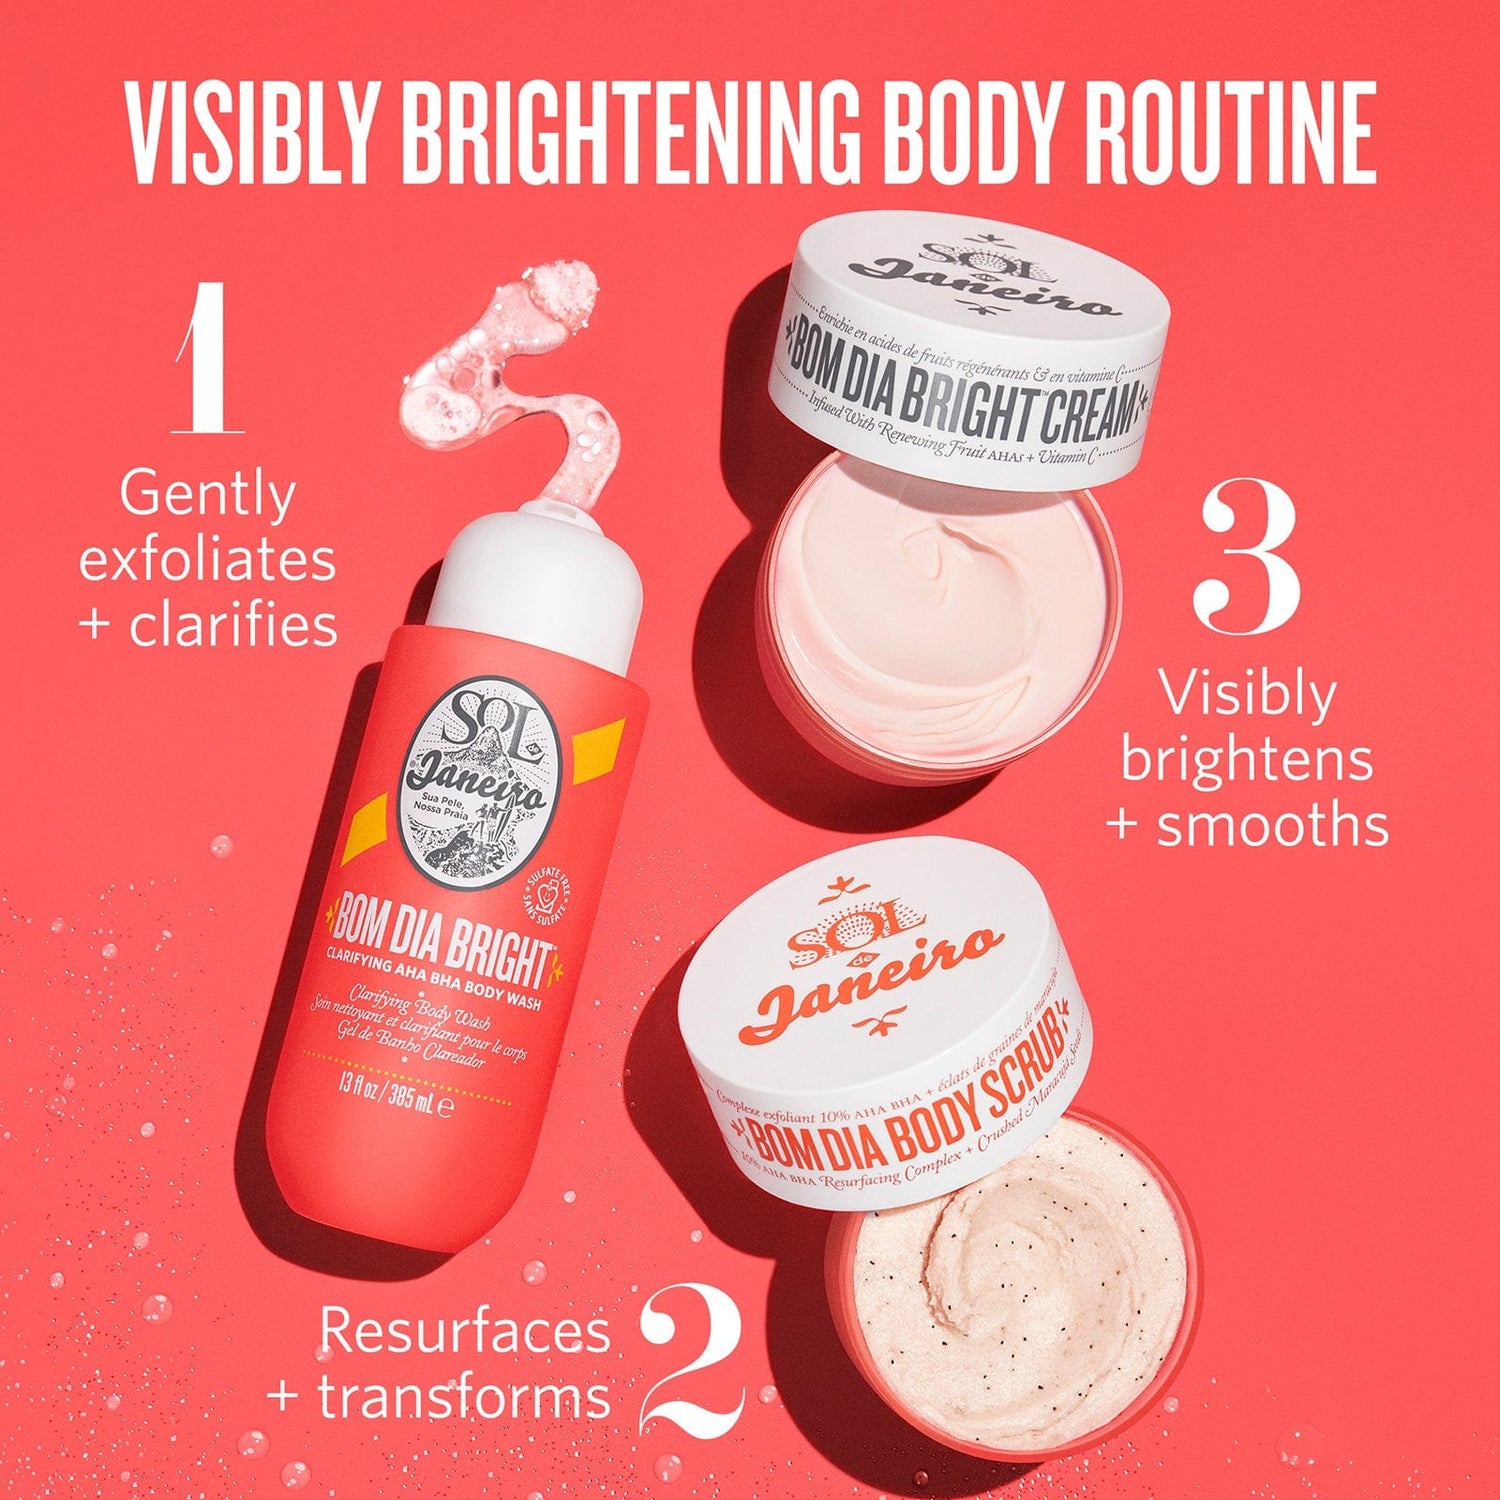 Visibly brightening body routine | 1. Gently exfoliates and clarifies - 2. resurfaces and transforms - 3. visibly brightens and Smooths